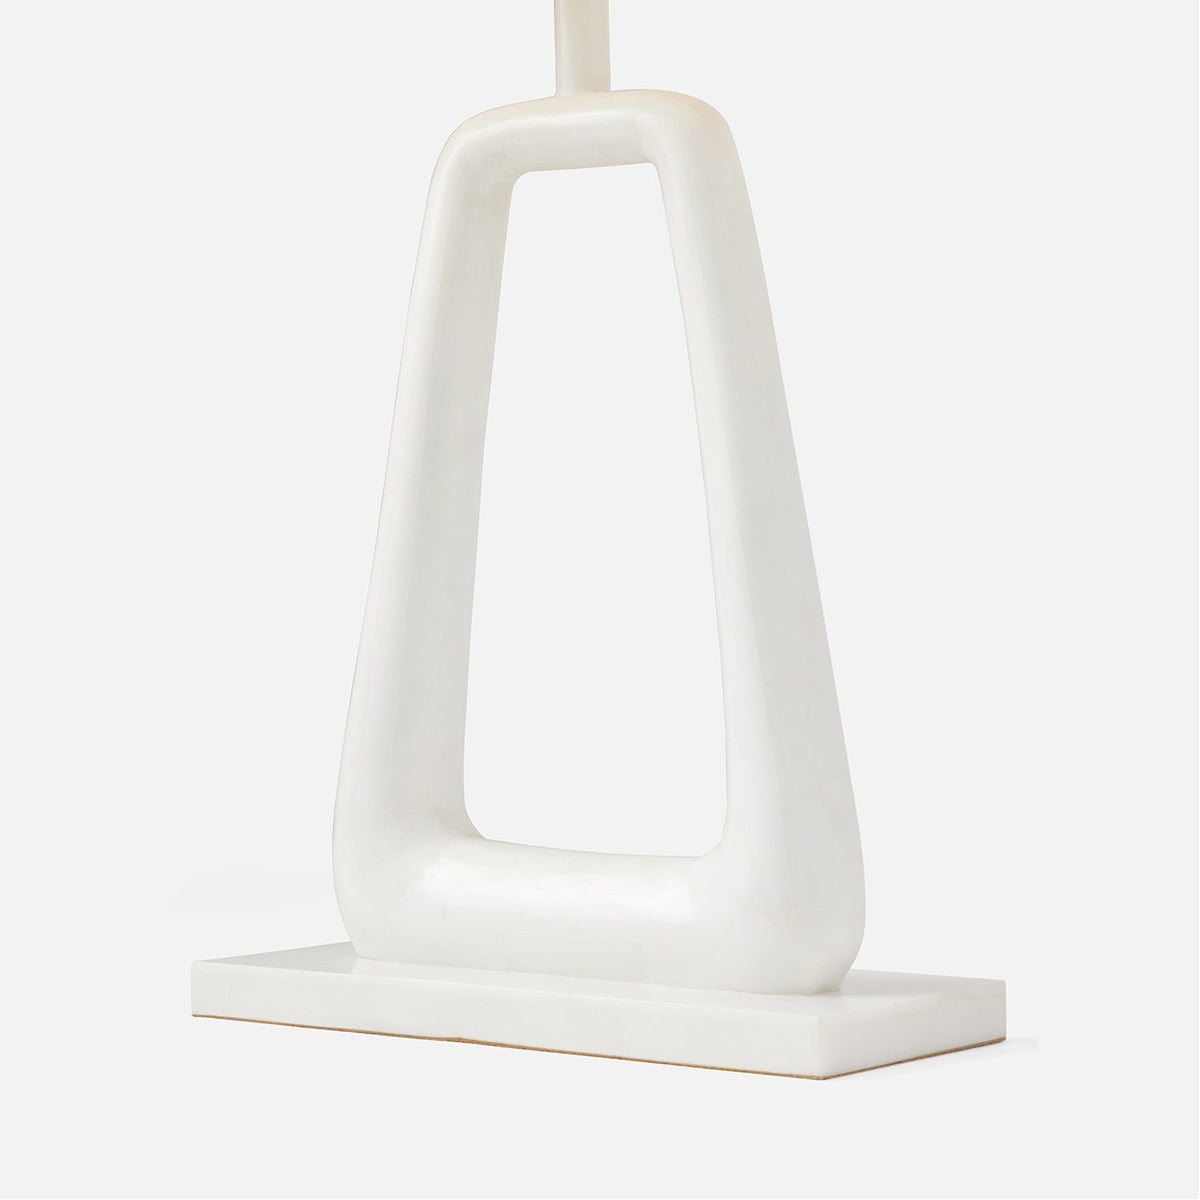 Made Goods Weldon Table Lamp in White Stone